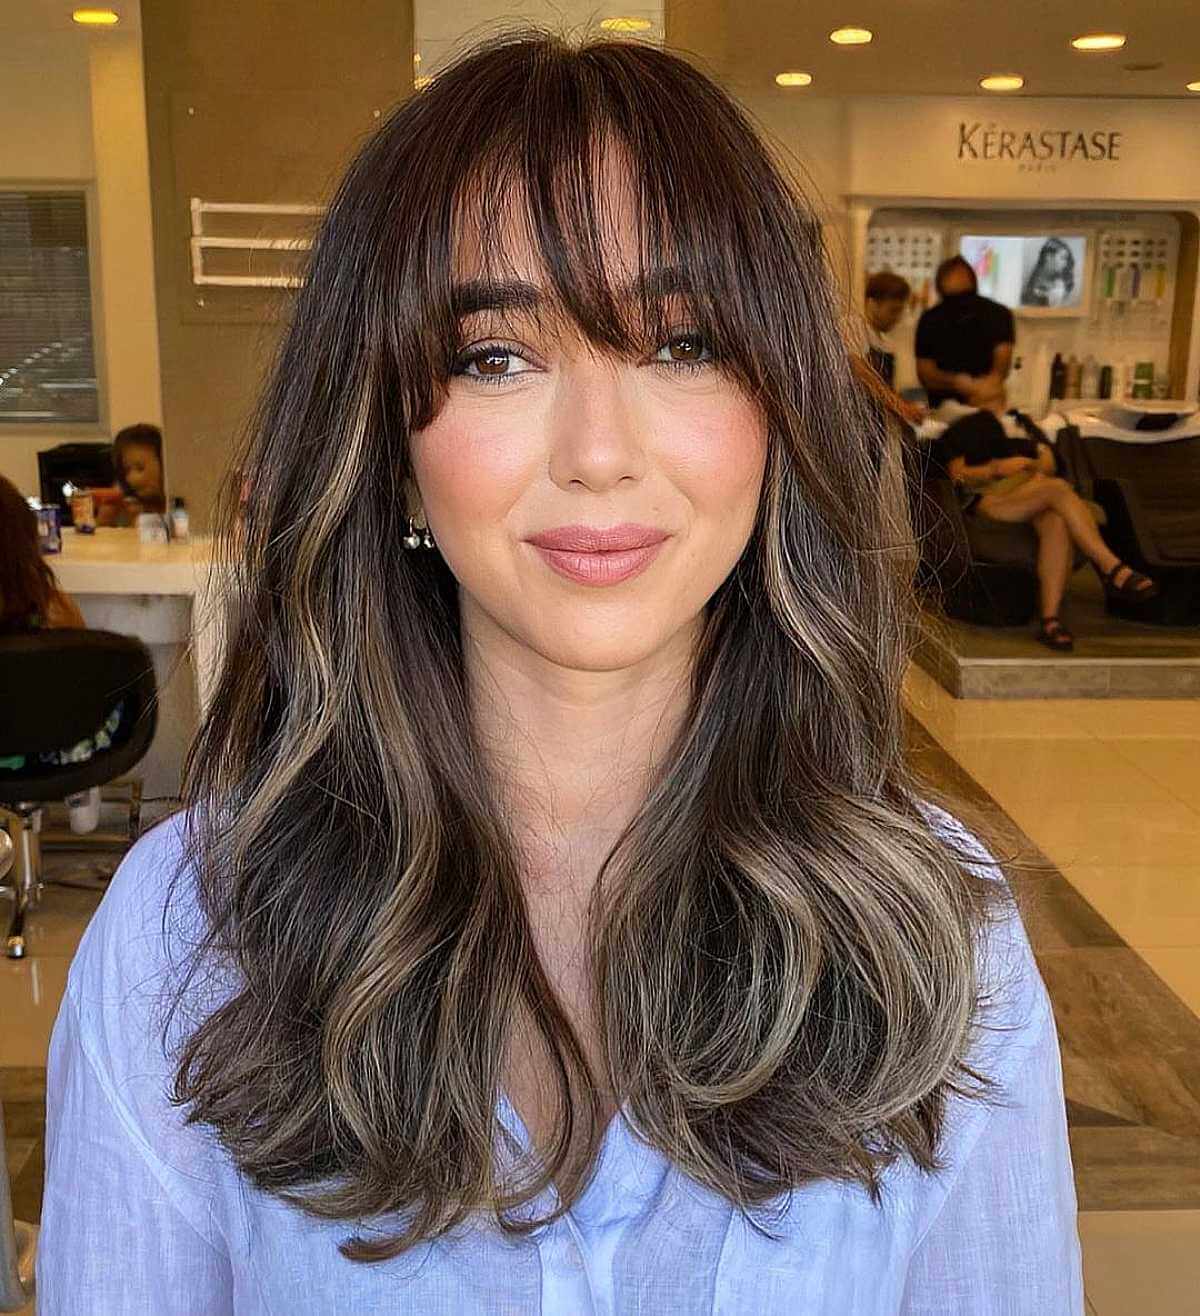 31 Cutest Wispy Bangs on Long Hair to Revamp Your Style